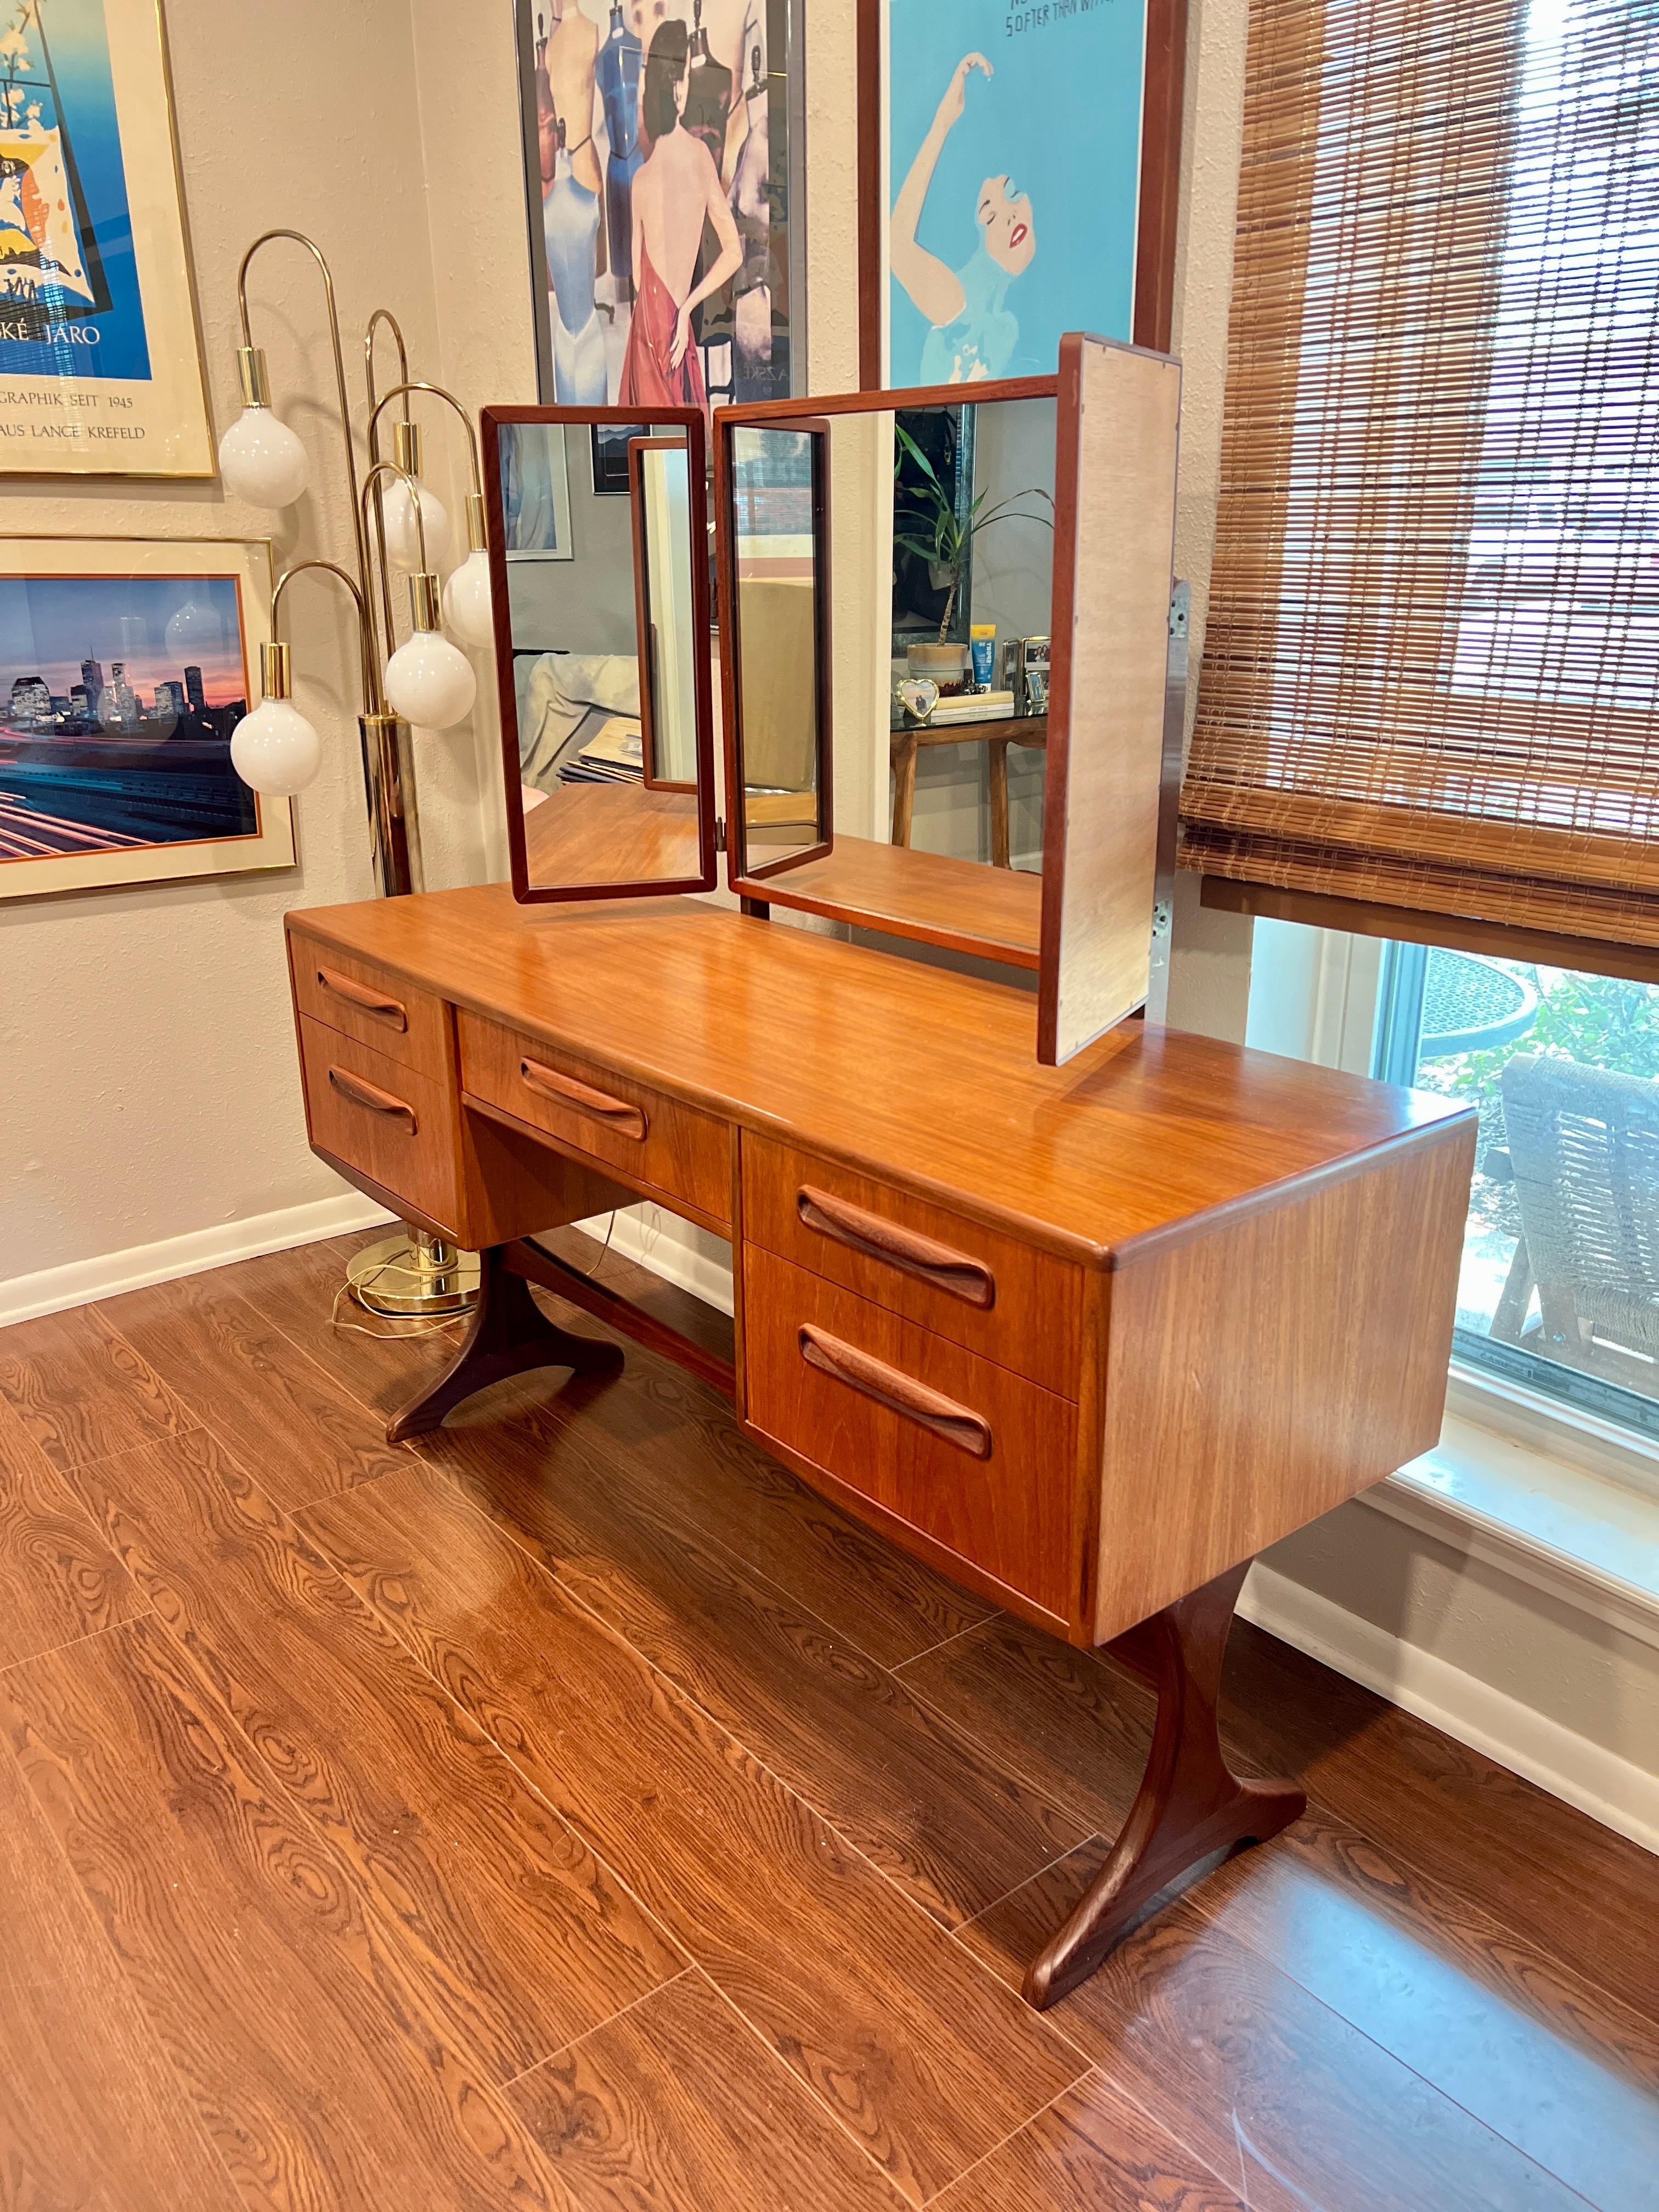 Stunning vintage Mid-Century Modern vanity / desk by G-Plan, part of their fresco range. This functional desk features 4 generous drawers separated by a central drawer lined in purple felt and a spacious kneehole suitable for a desk chair. The piece